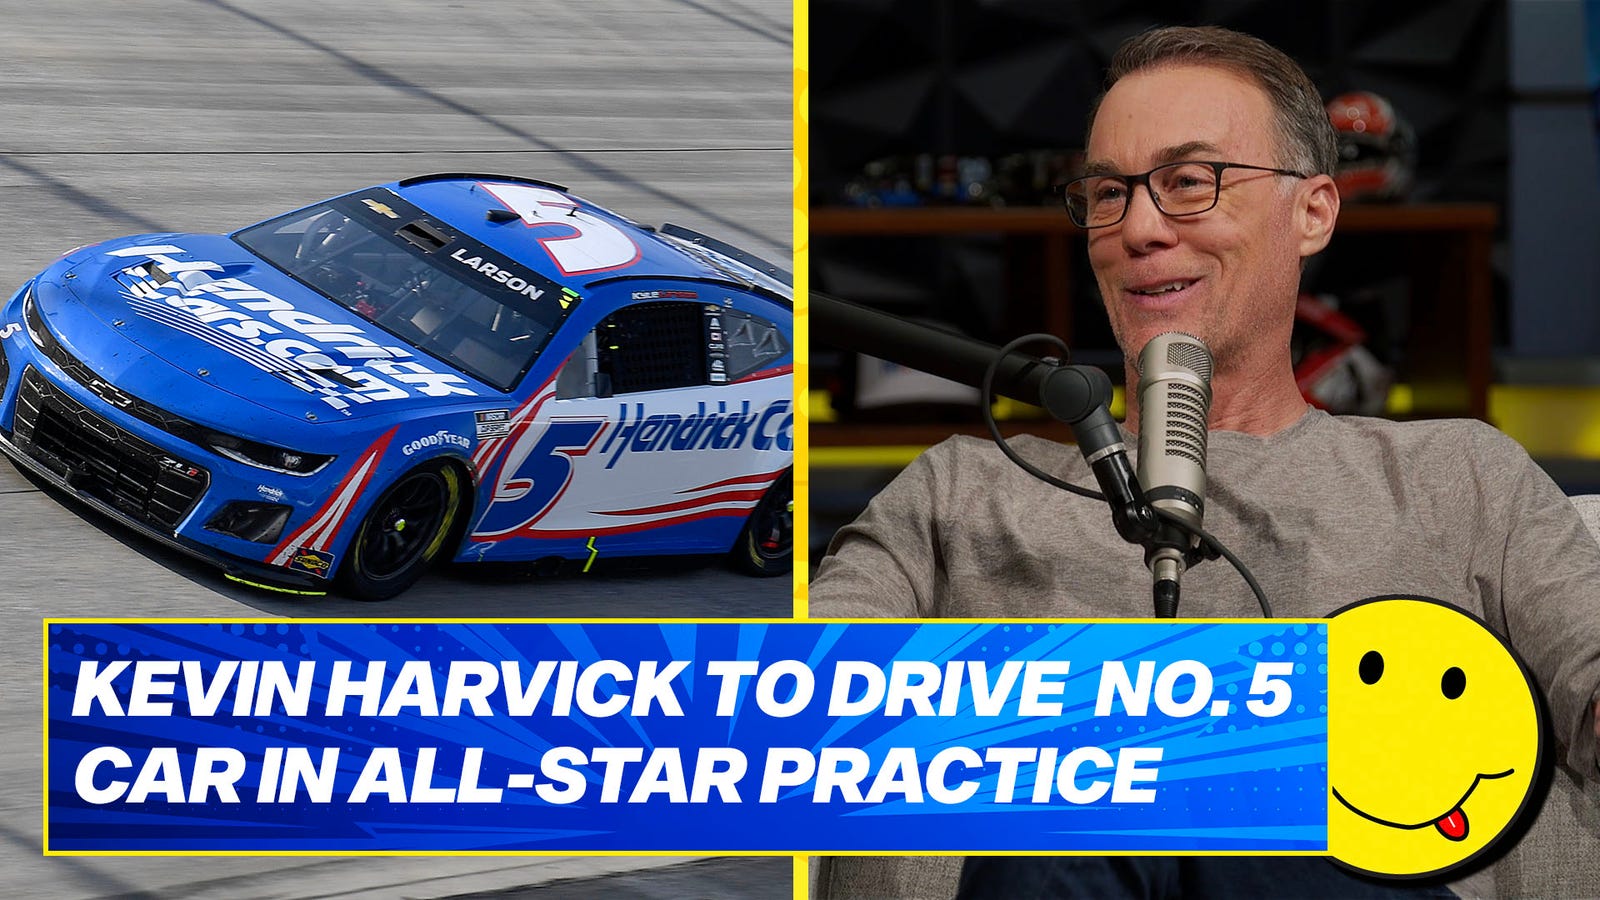 Kevin Harvick on getting to drive the No. 5 car for Kyle Larson in all-star race practice